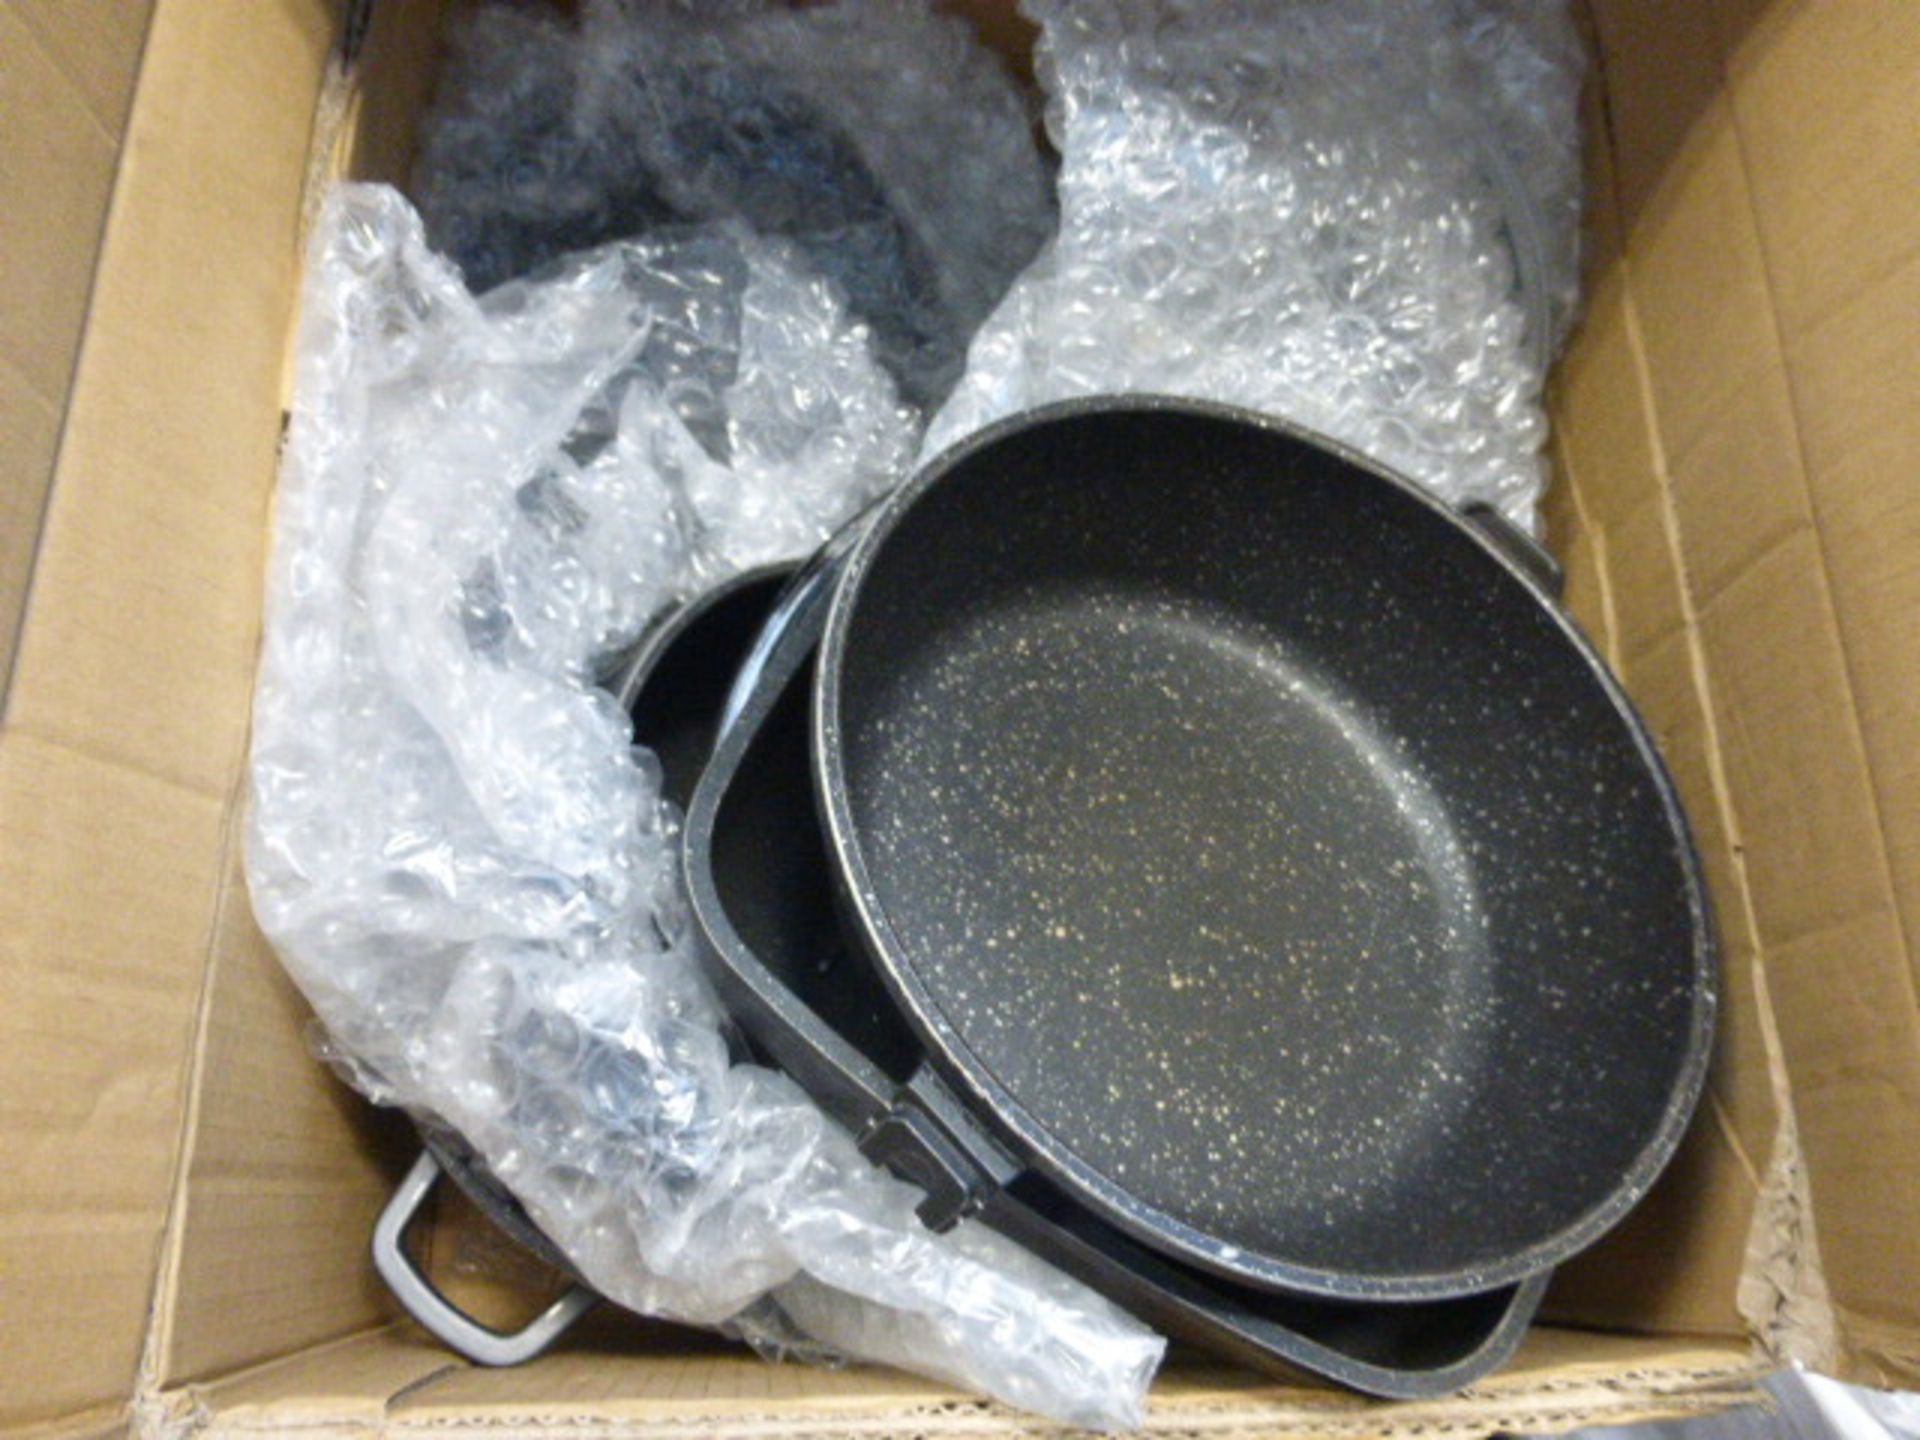 Boxed Kirkland stainless steel cookware set (used)